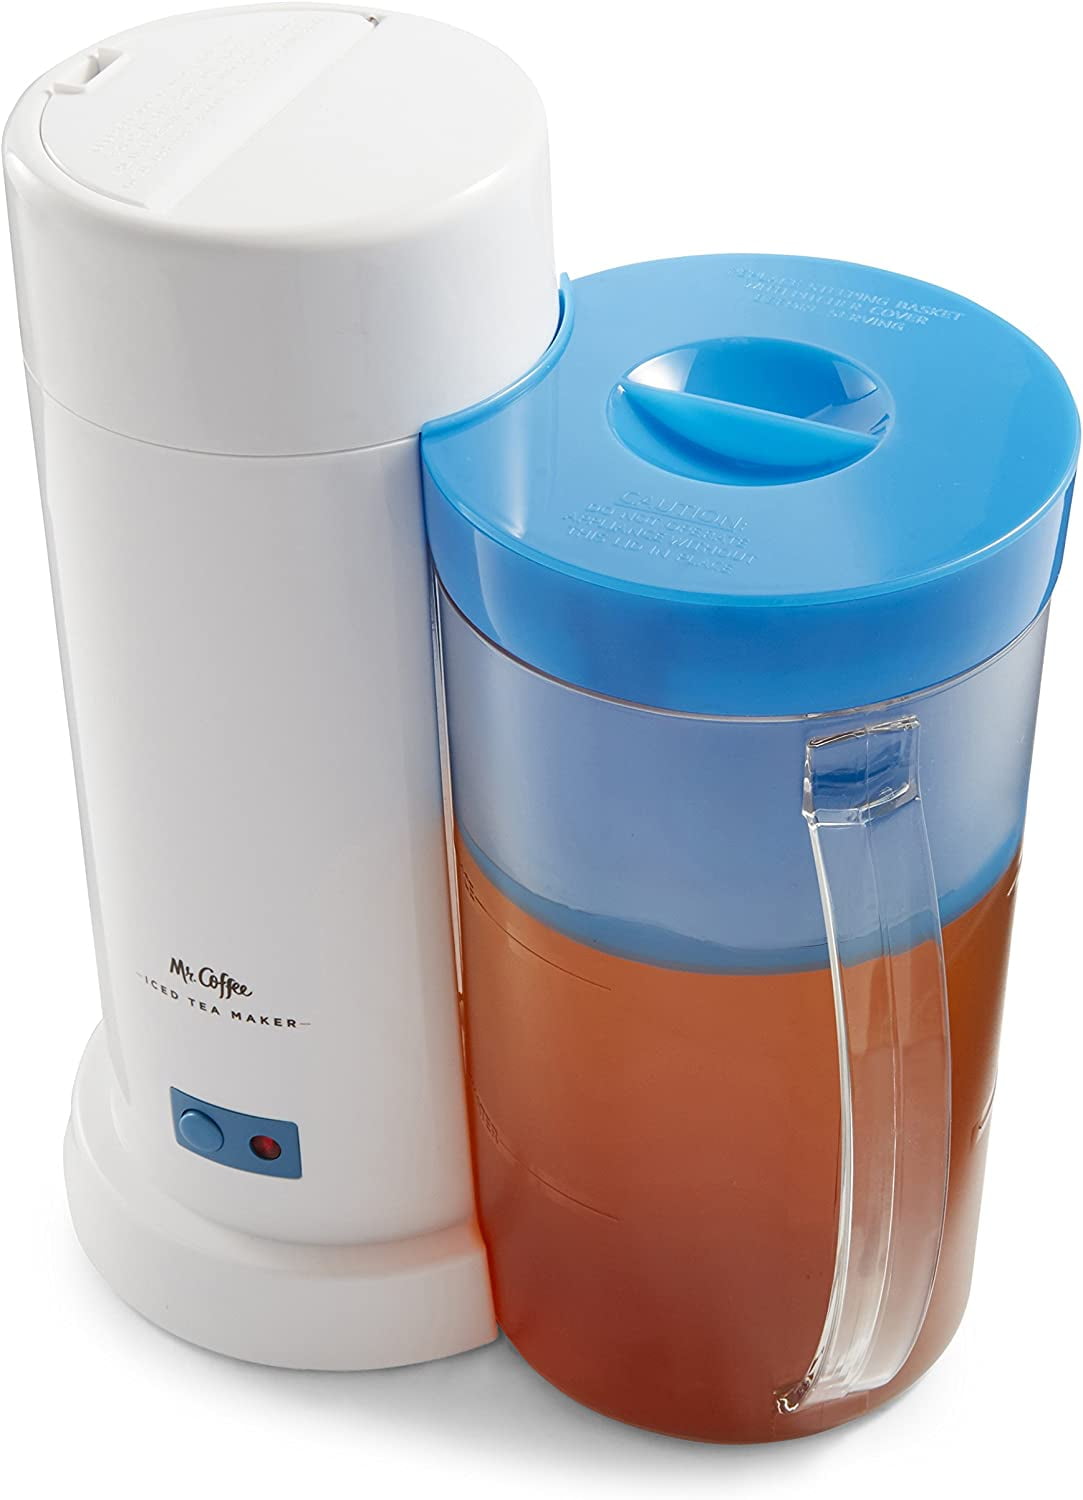 MR. COFFEE ICED Tea Maker and Pitcher TM 1.7 Blue Preowned Manual No Box  $23.99 - PicClick